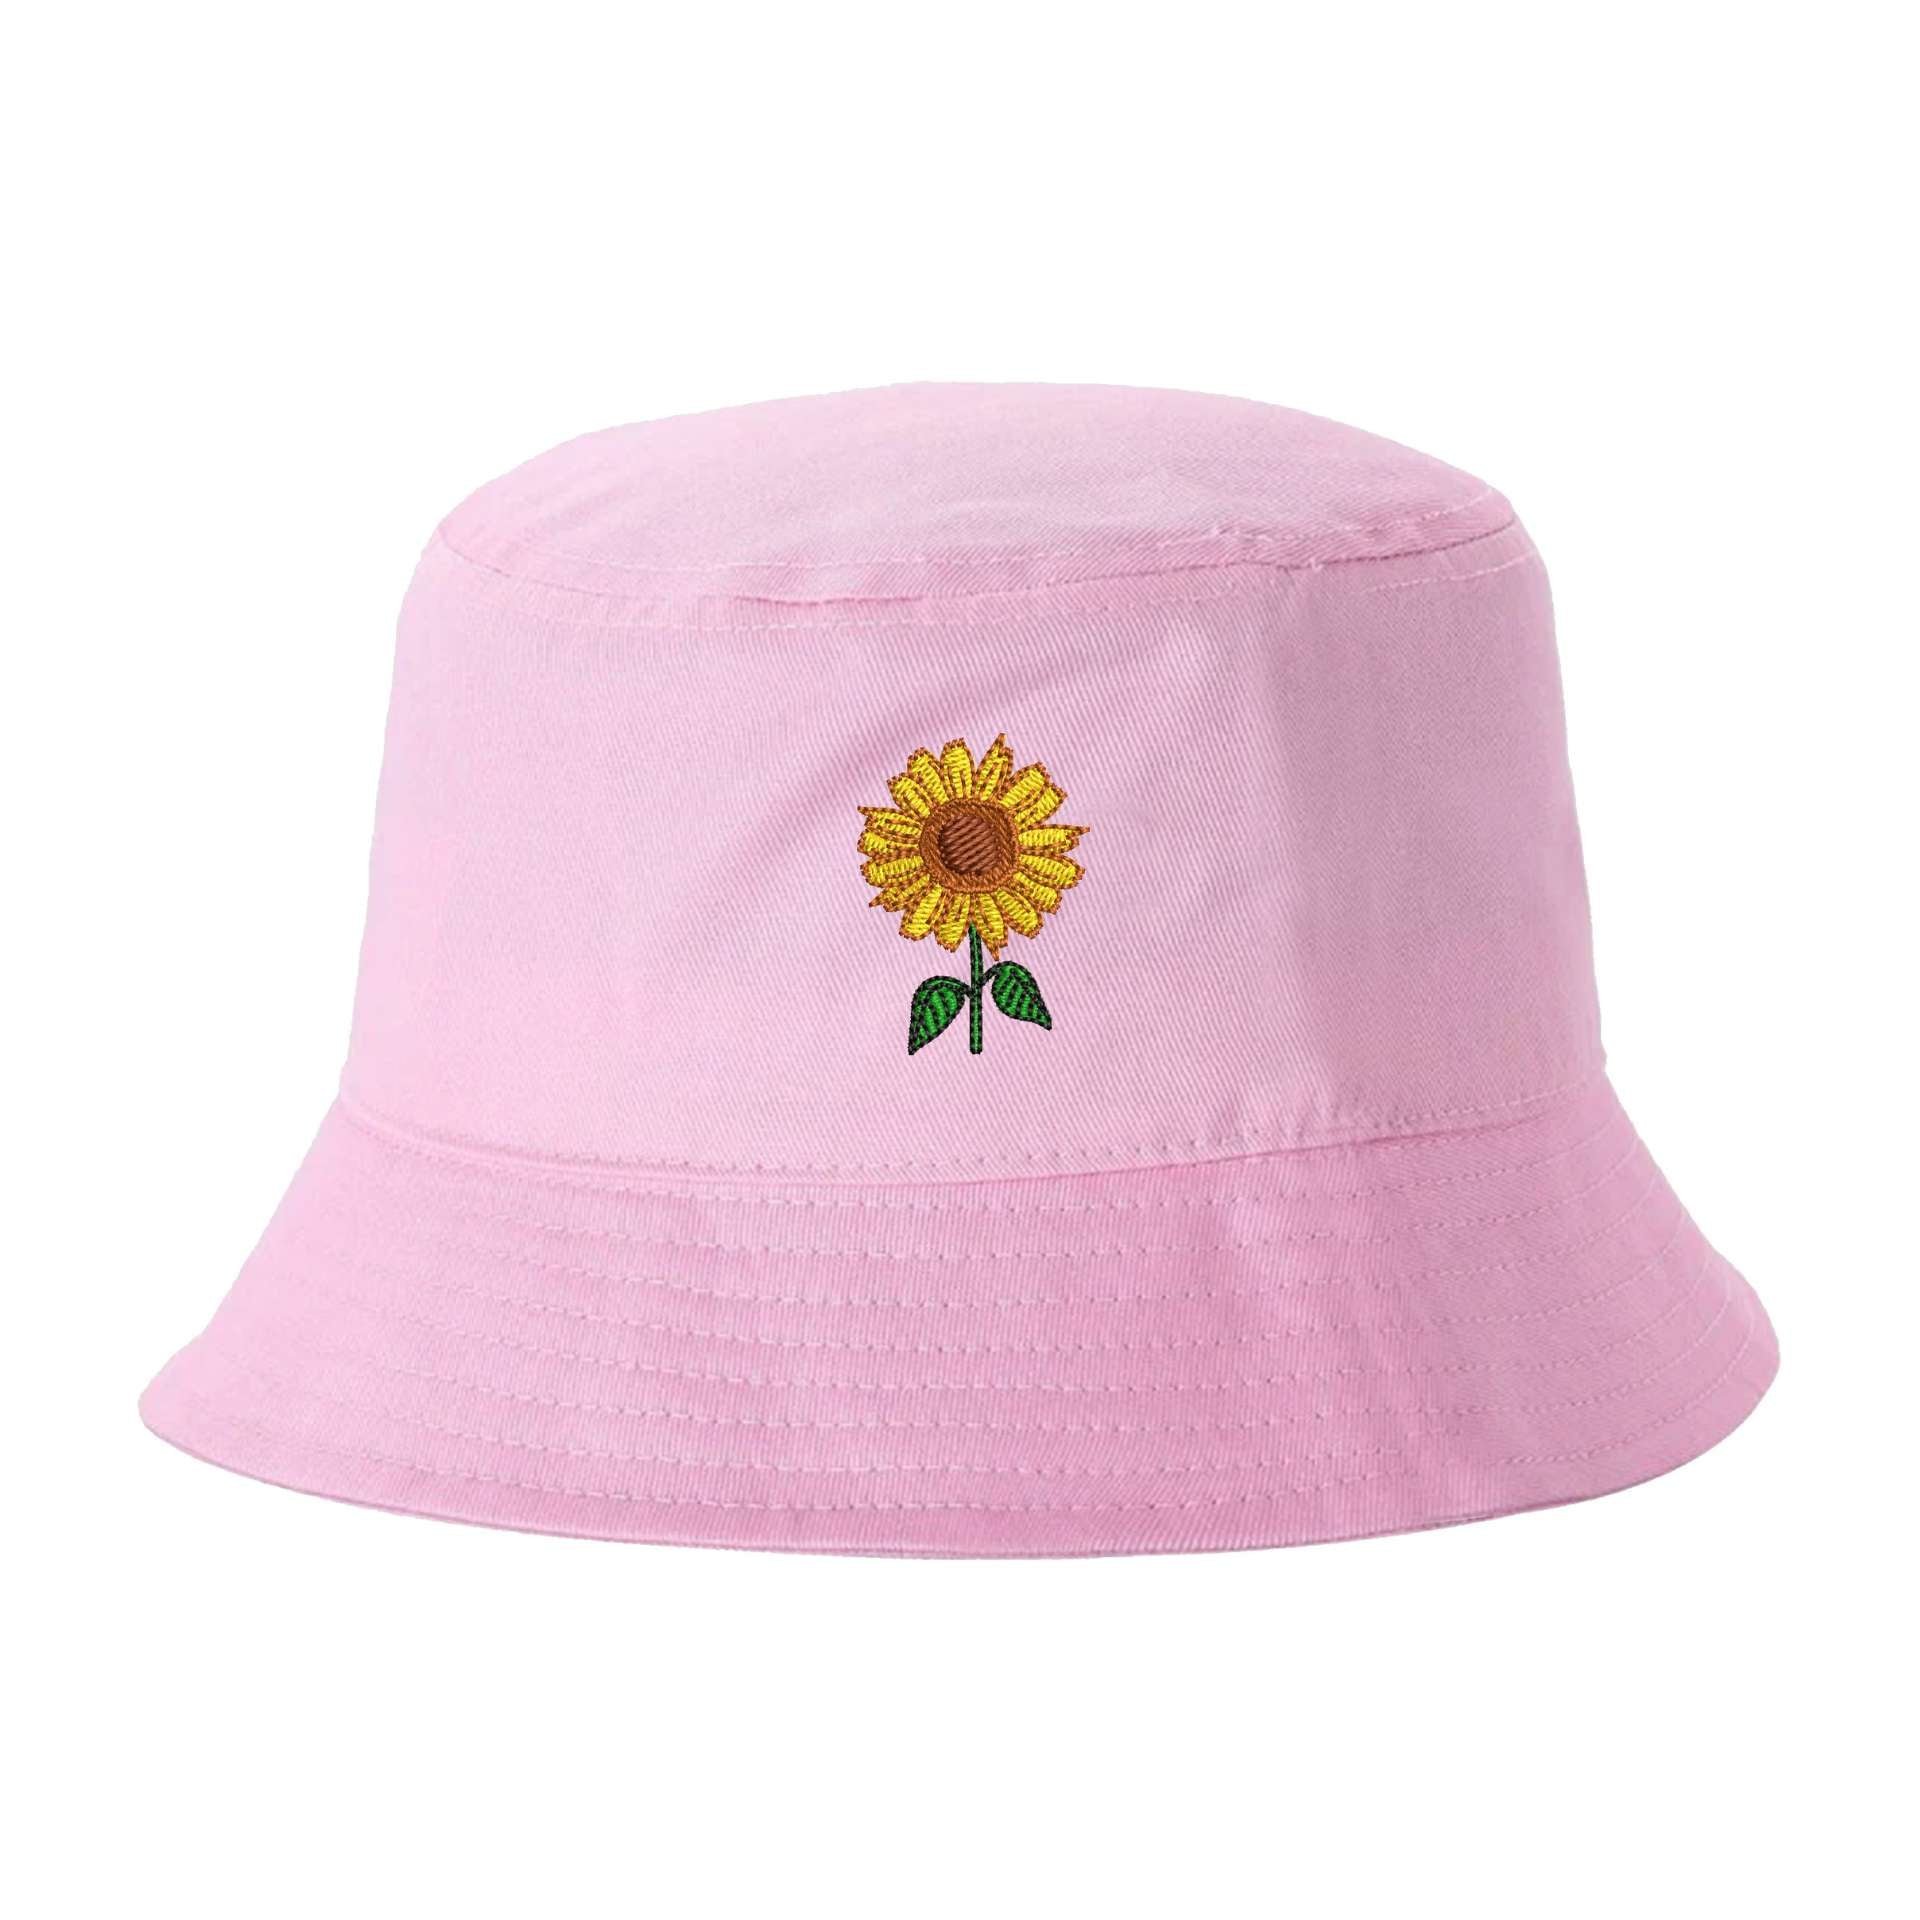 Pink Bucket hat embroidered with a sunflower for spring - DSY Lifestyle